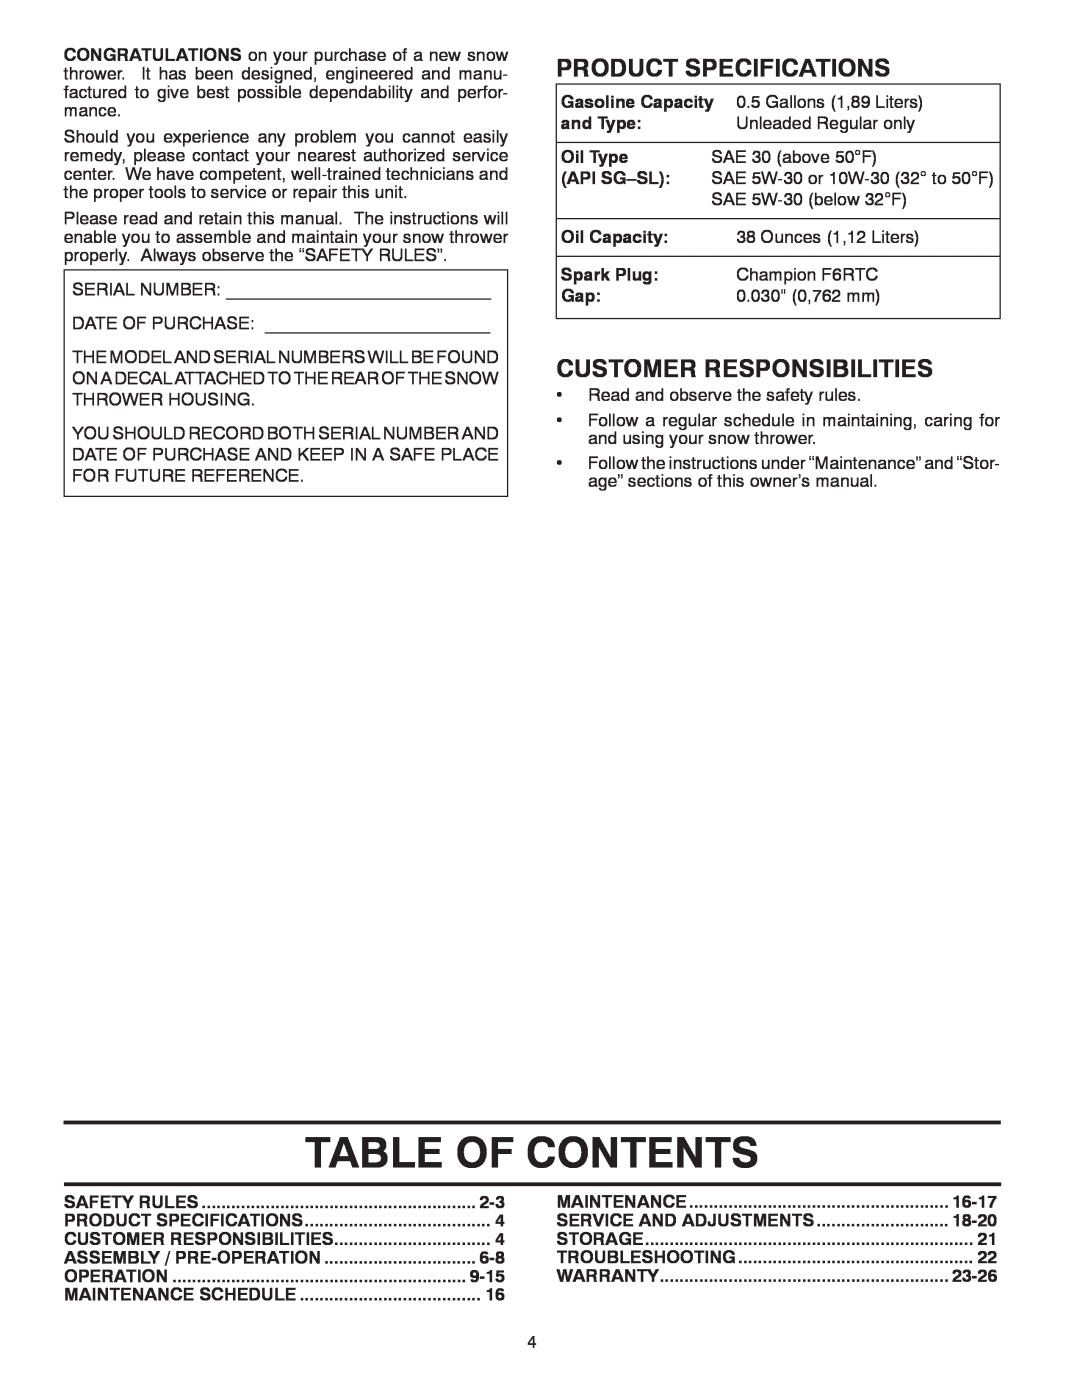 Husqvarna 1827EXLT Table Of Contents, Product Specifications, Customer Responsibilities, Oil Type, Api Sg-Sl, Oil Capacity 